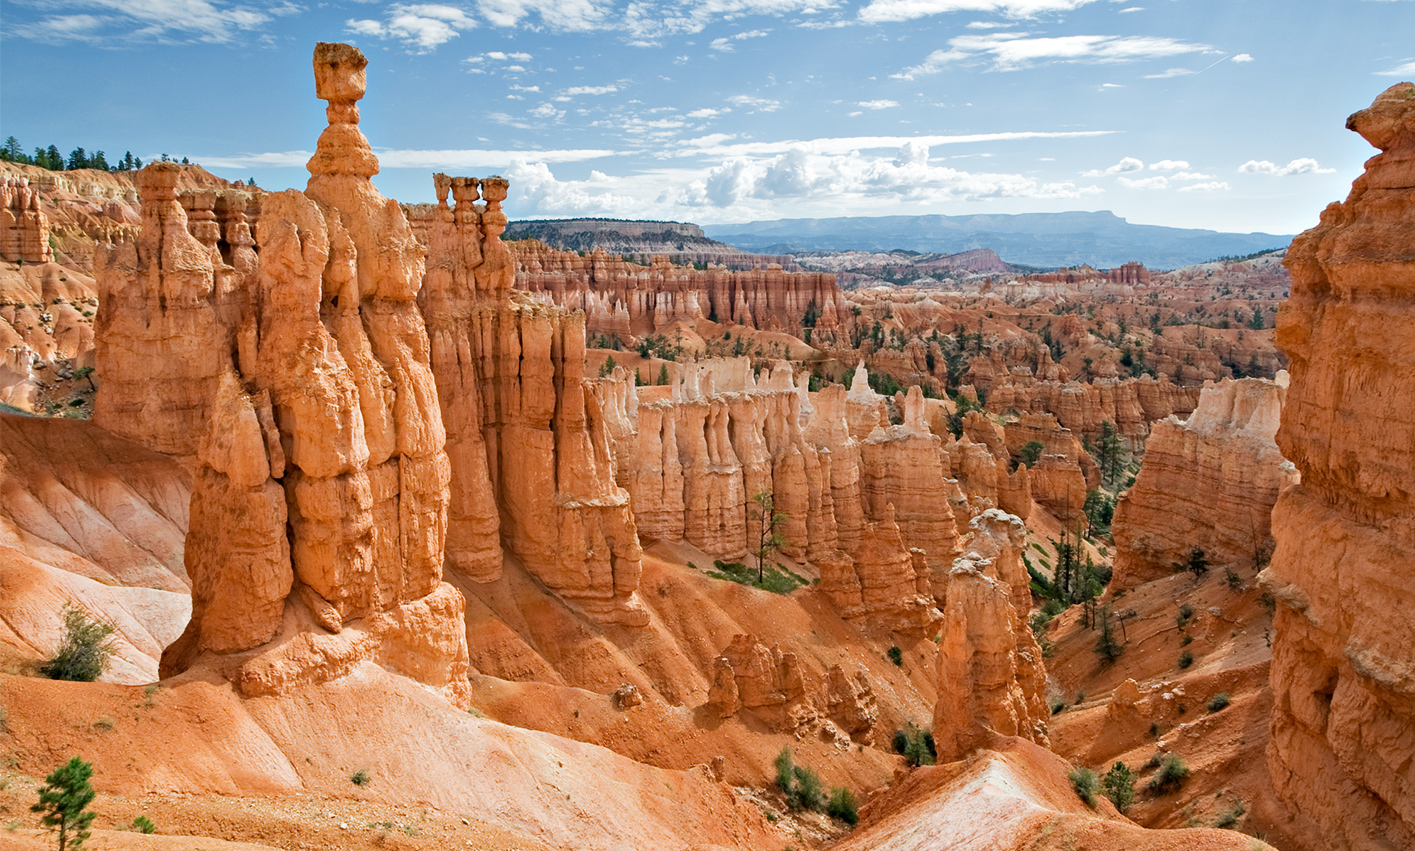 Thor's Hammer formation in Bryce Canyon National Park. Southwestern Utah, USA.